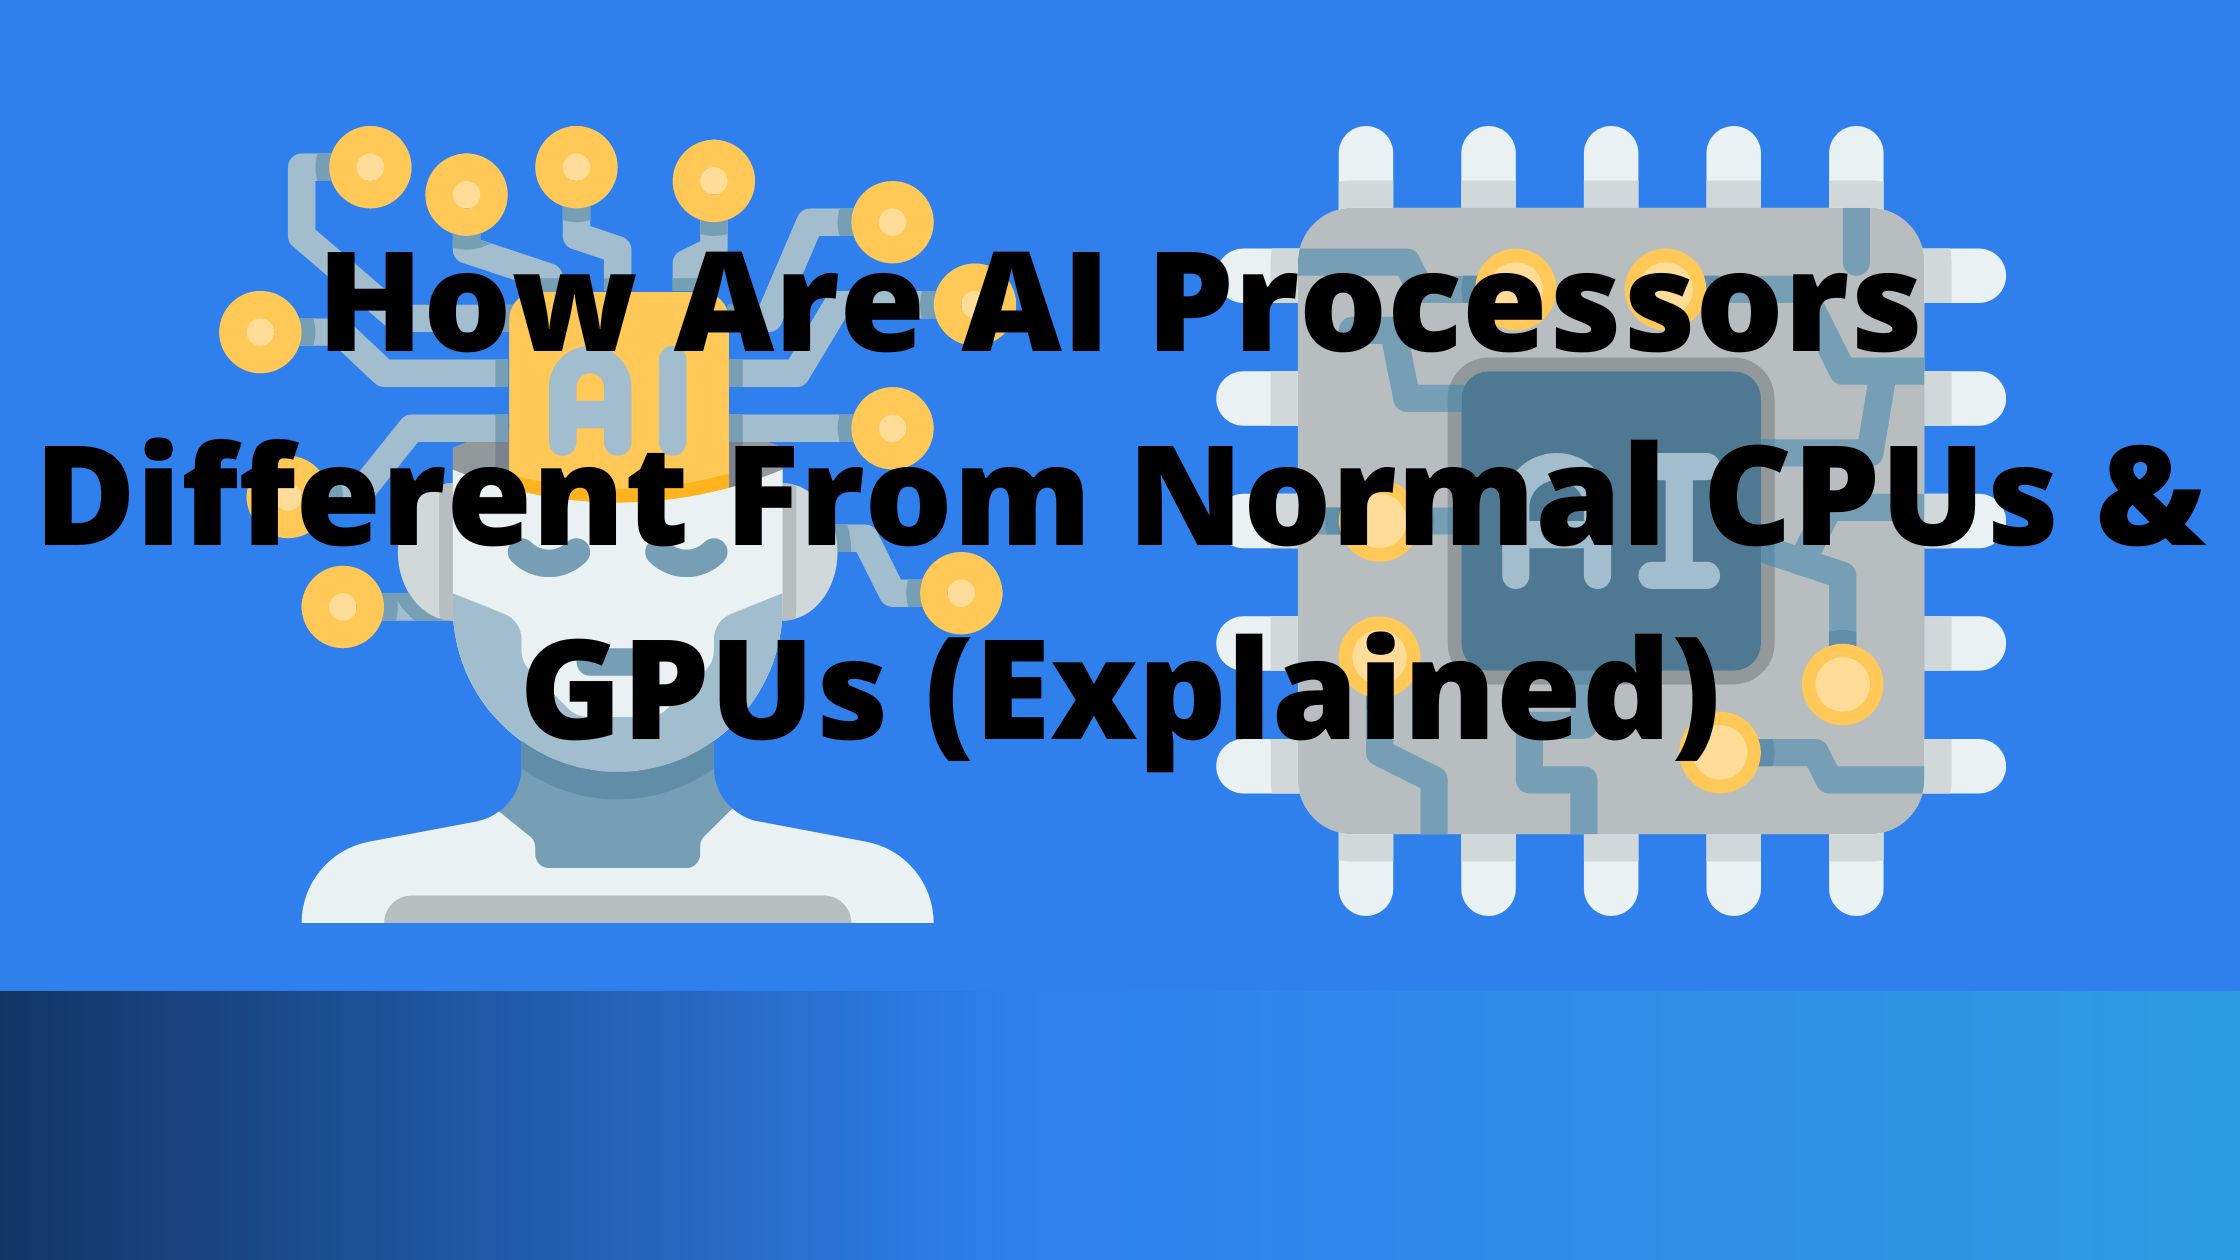 How Are AI Processors Different From Normal CPUs & GPUs (Explained)